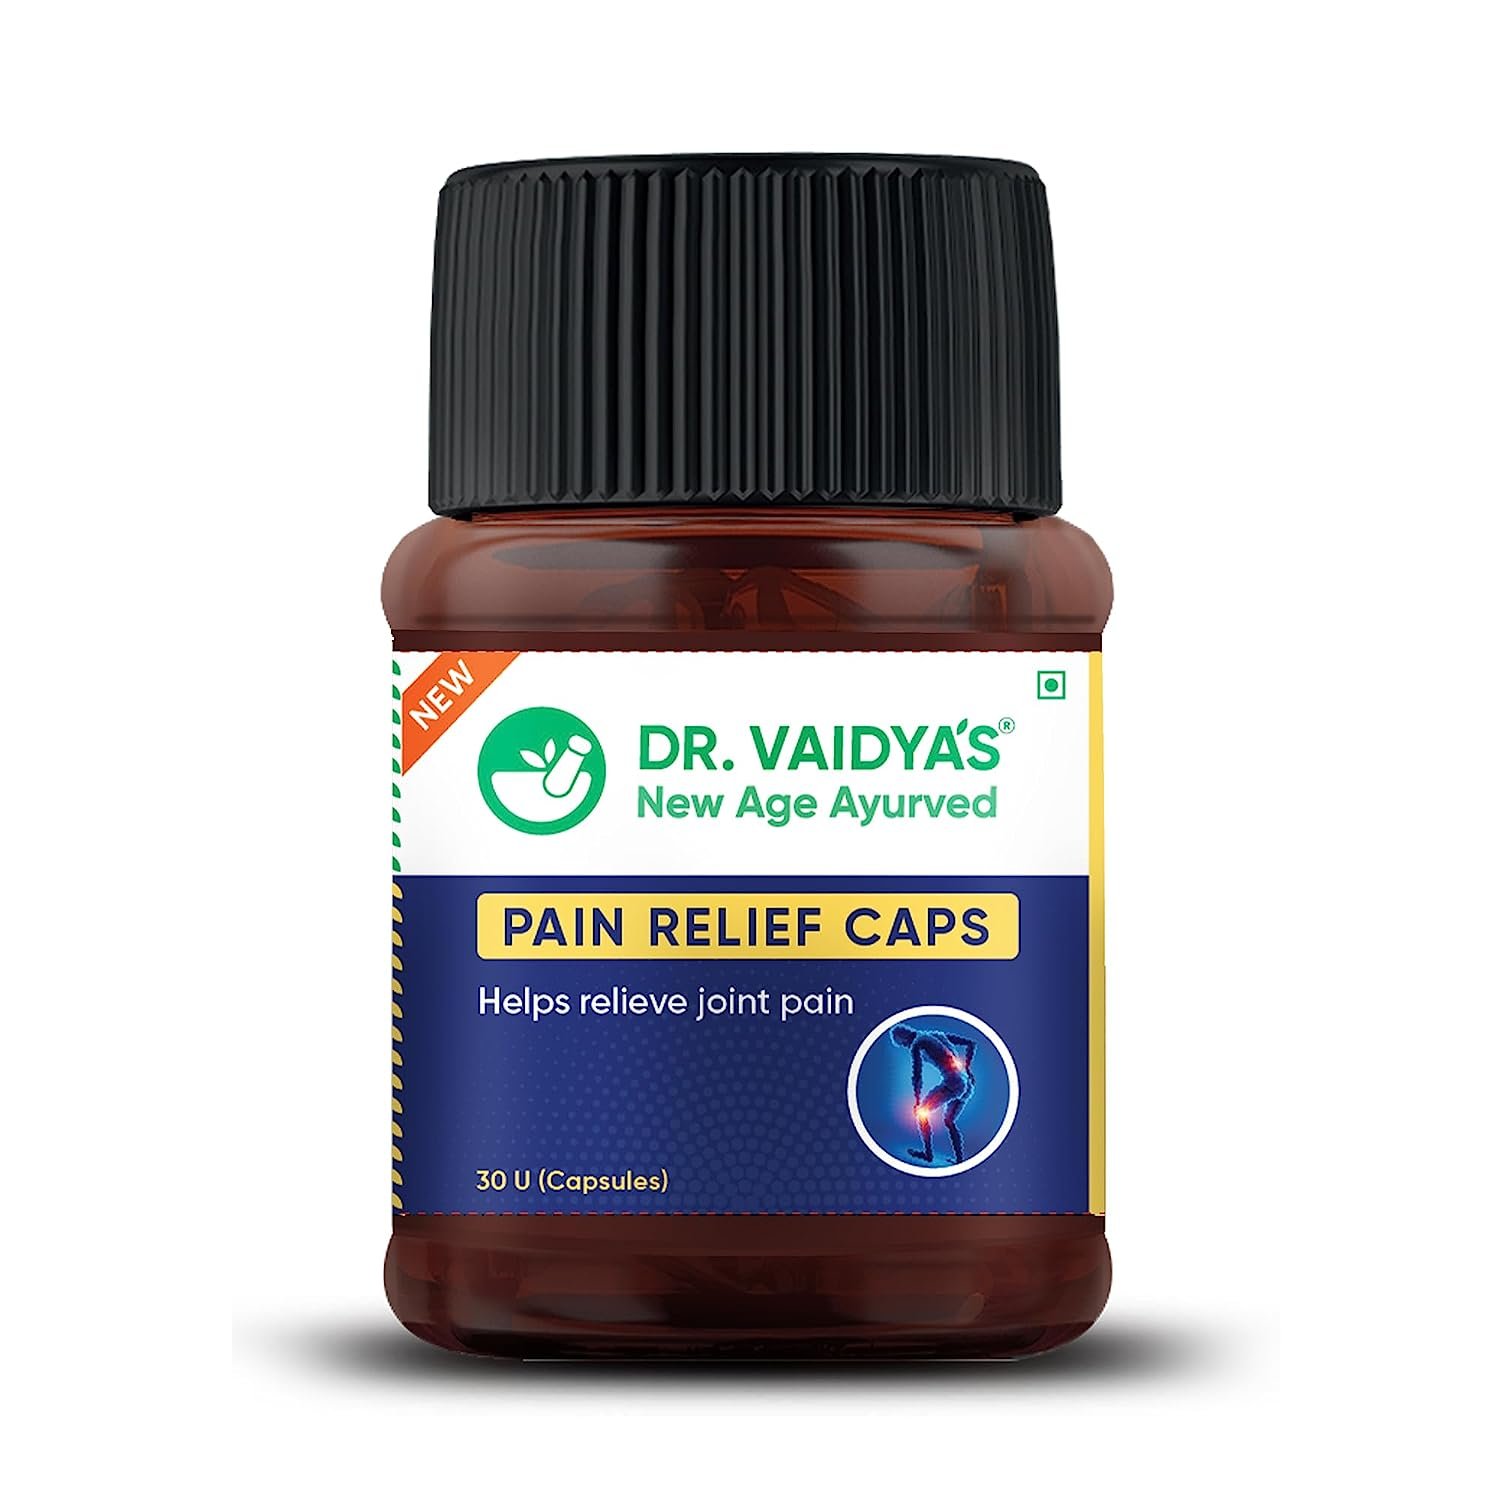 DR. VAIDYA'S Pain Relief Capsules Ayurvedic Medicine for Joint 30 Capsules